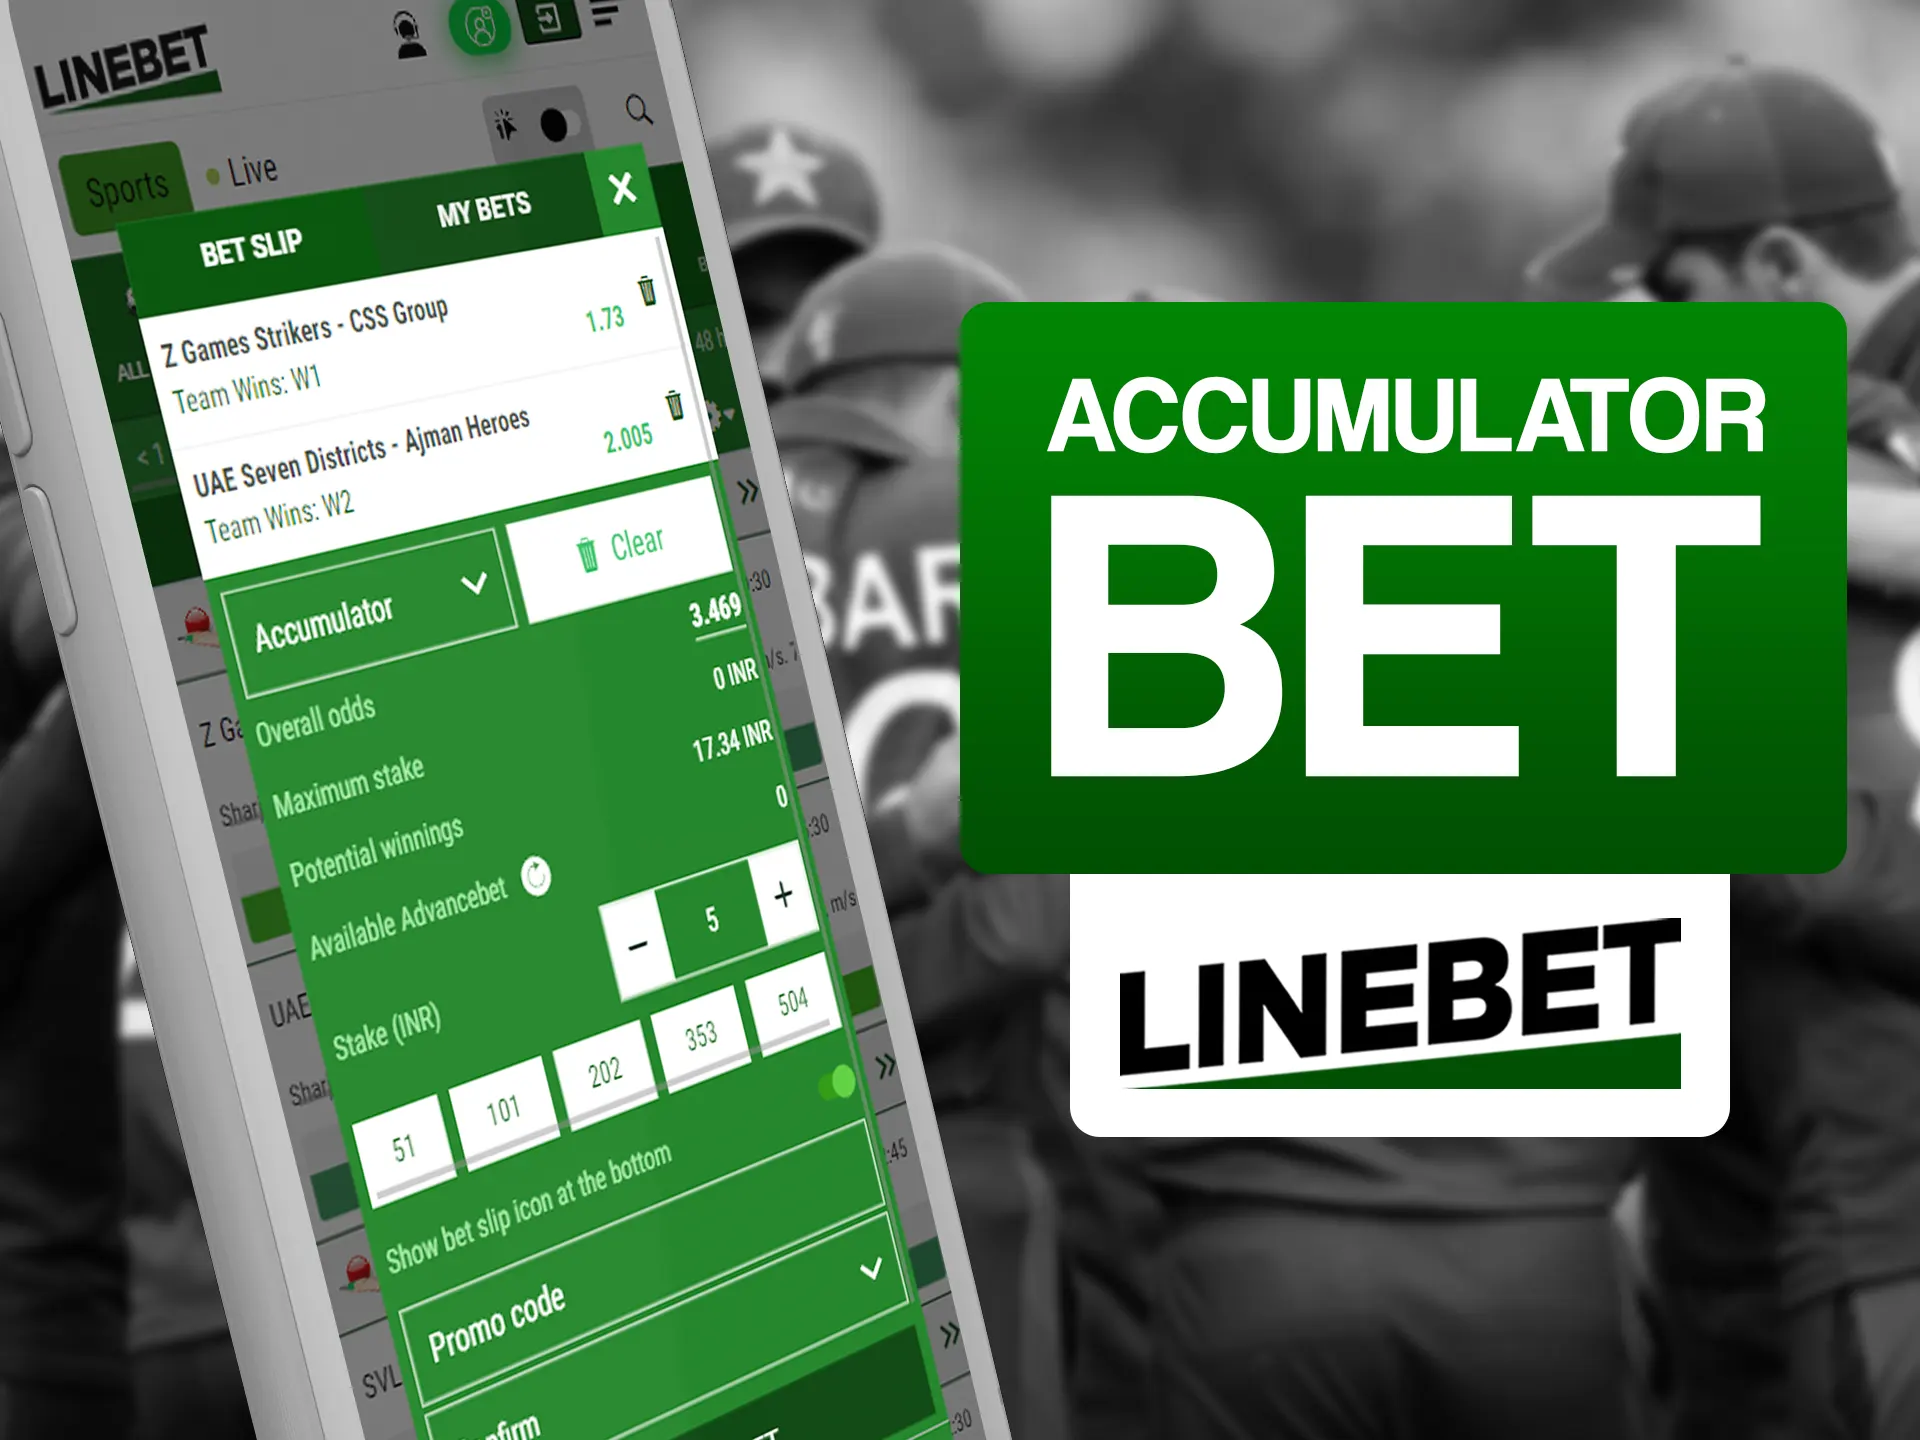 Gather multiple matches and make one big bet at Linebet.